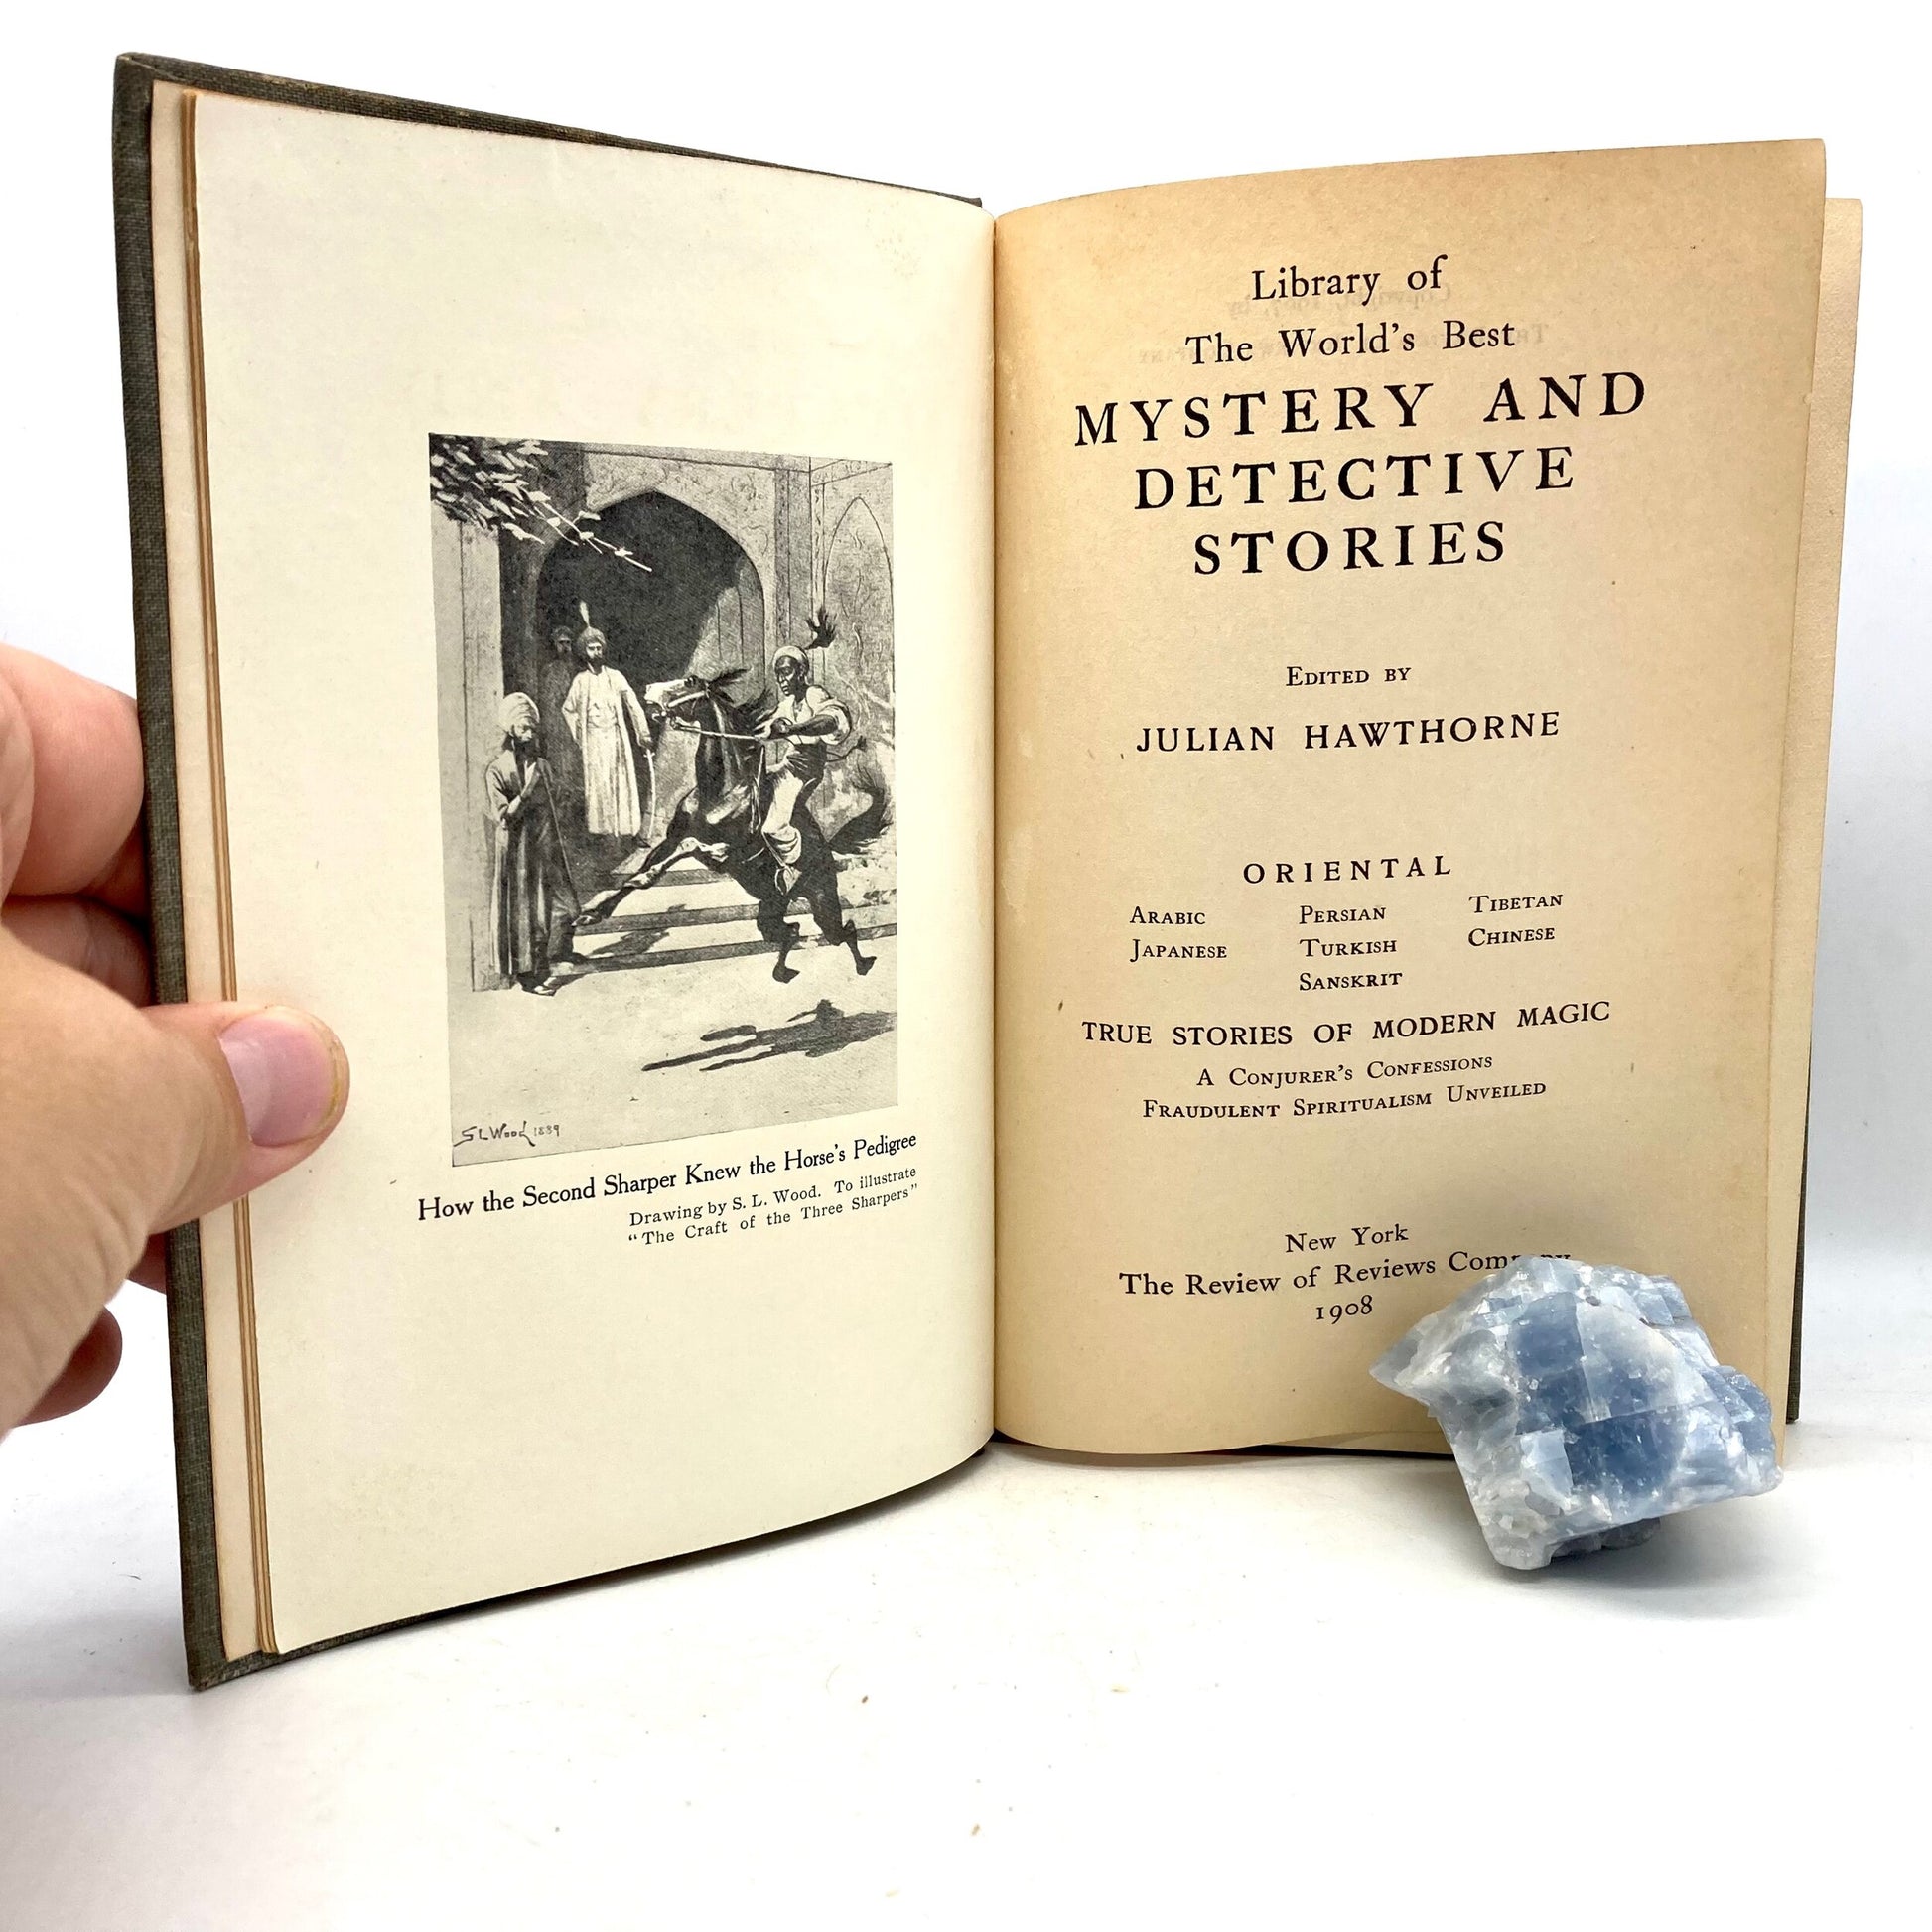 HAWTHORNE, Julian "World's Best Mystery and Detective Stories: Oriental Magic" [Review of Reviews, 1908] - Buzz Bookstore